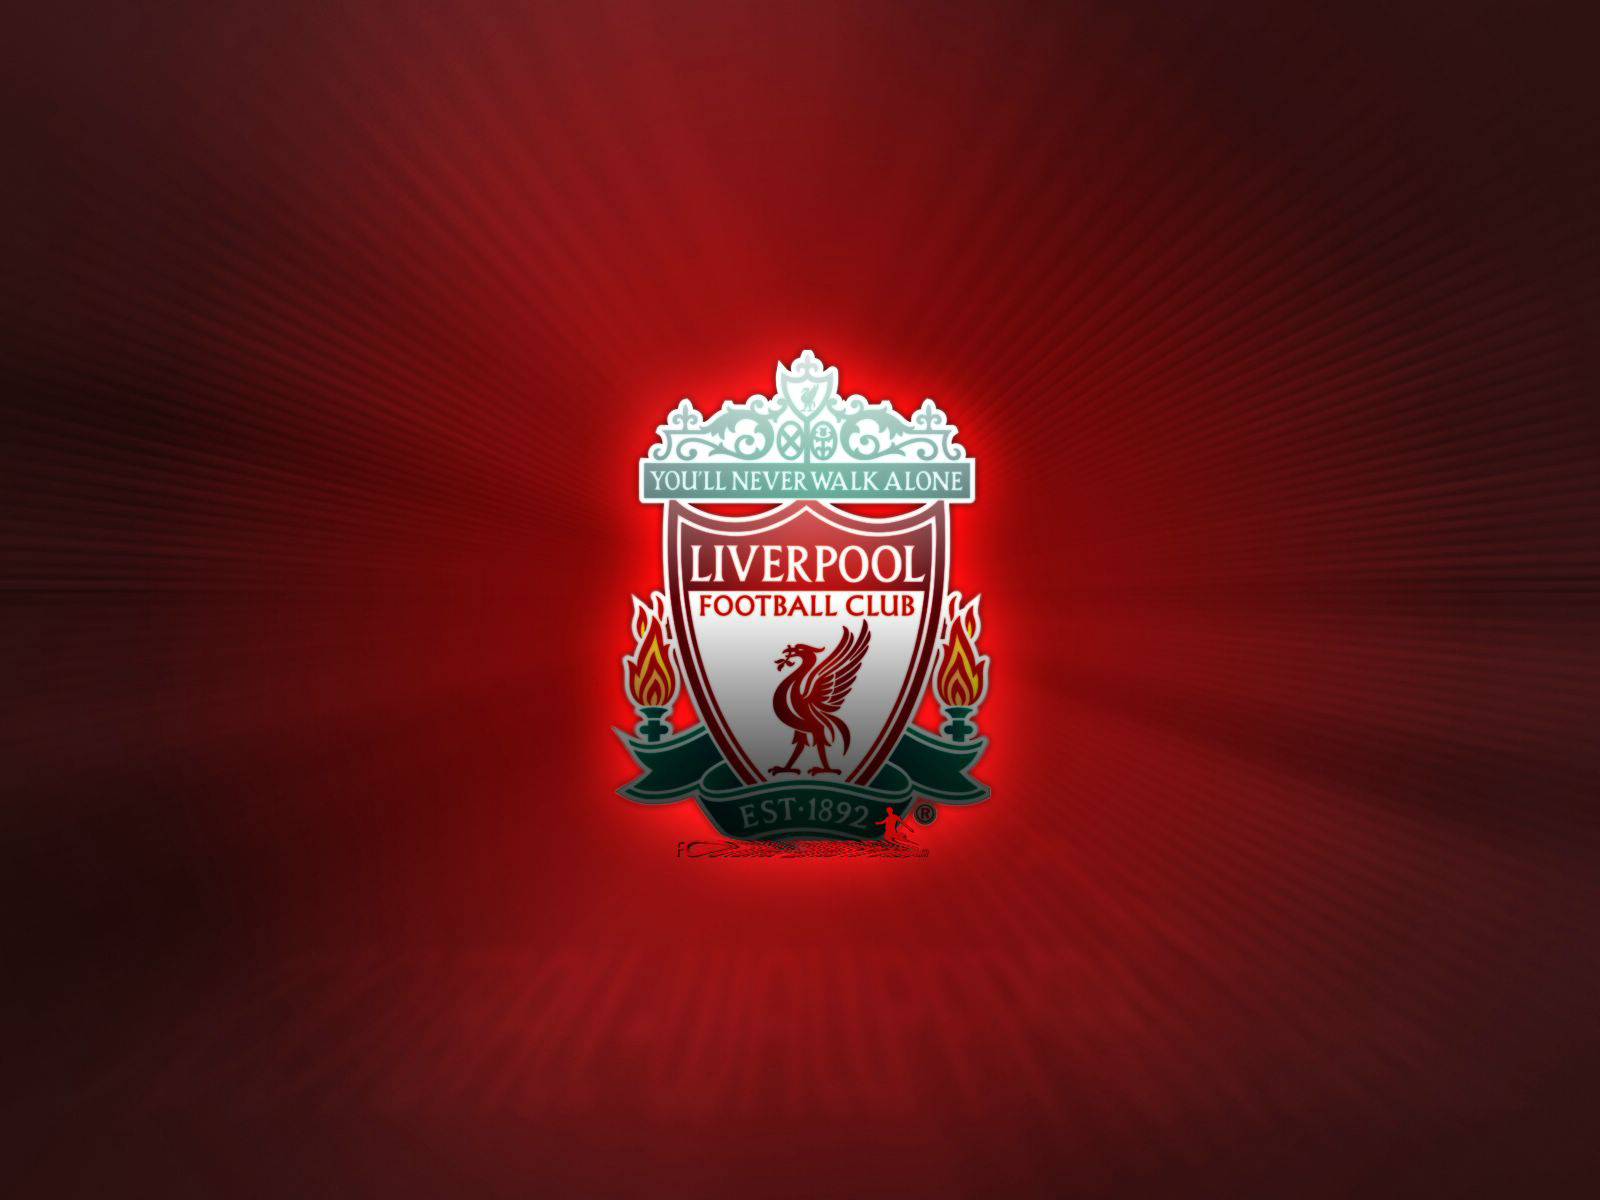 Free HQ Liverpoolfc 007 Wallpaper   Free HQ Wallpapers